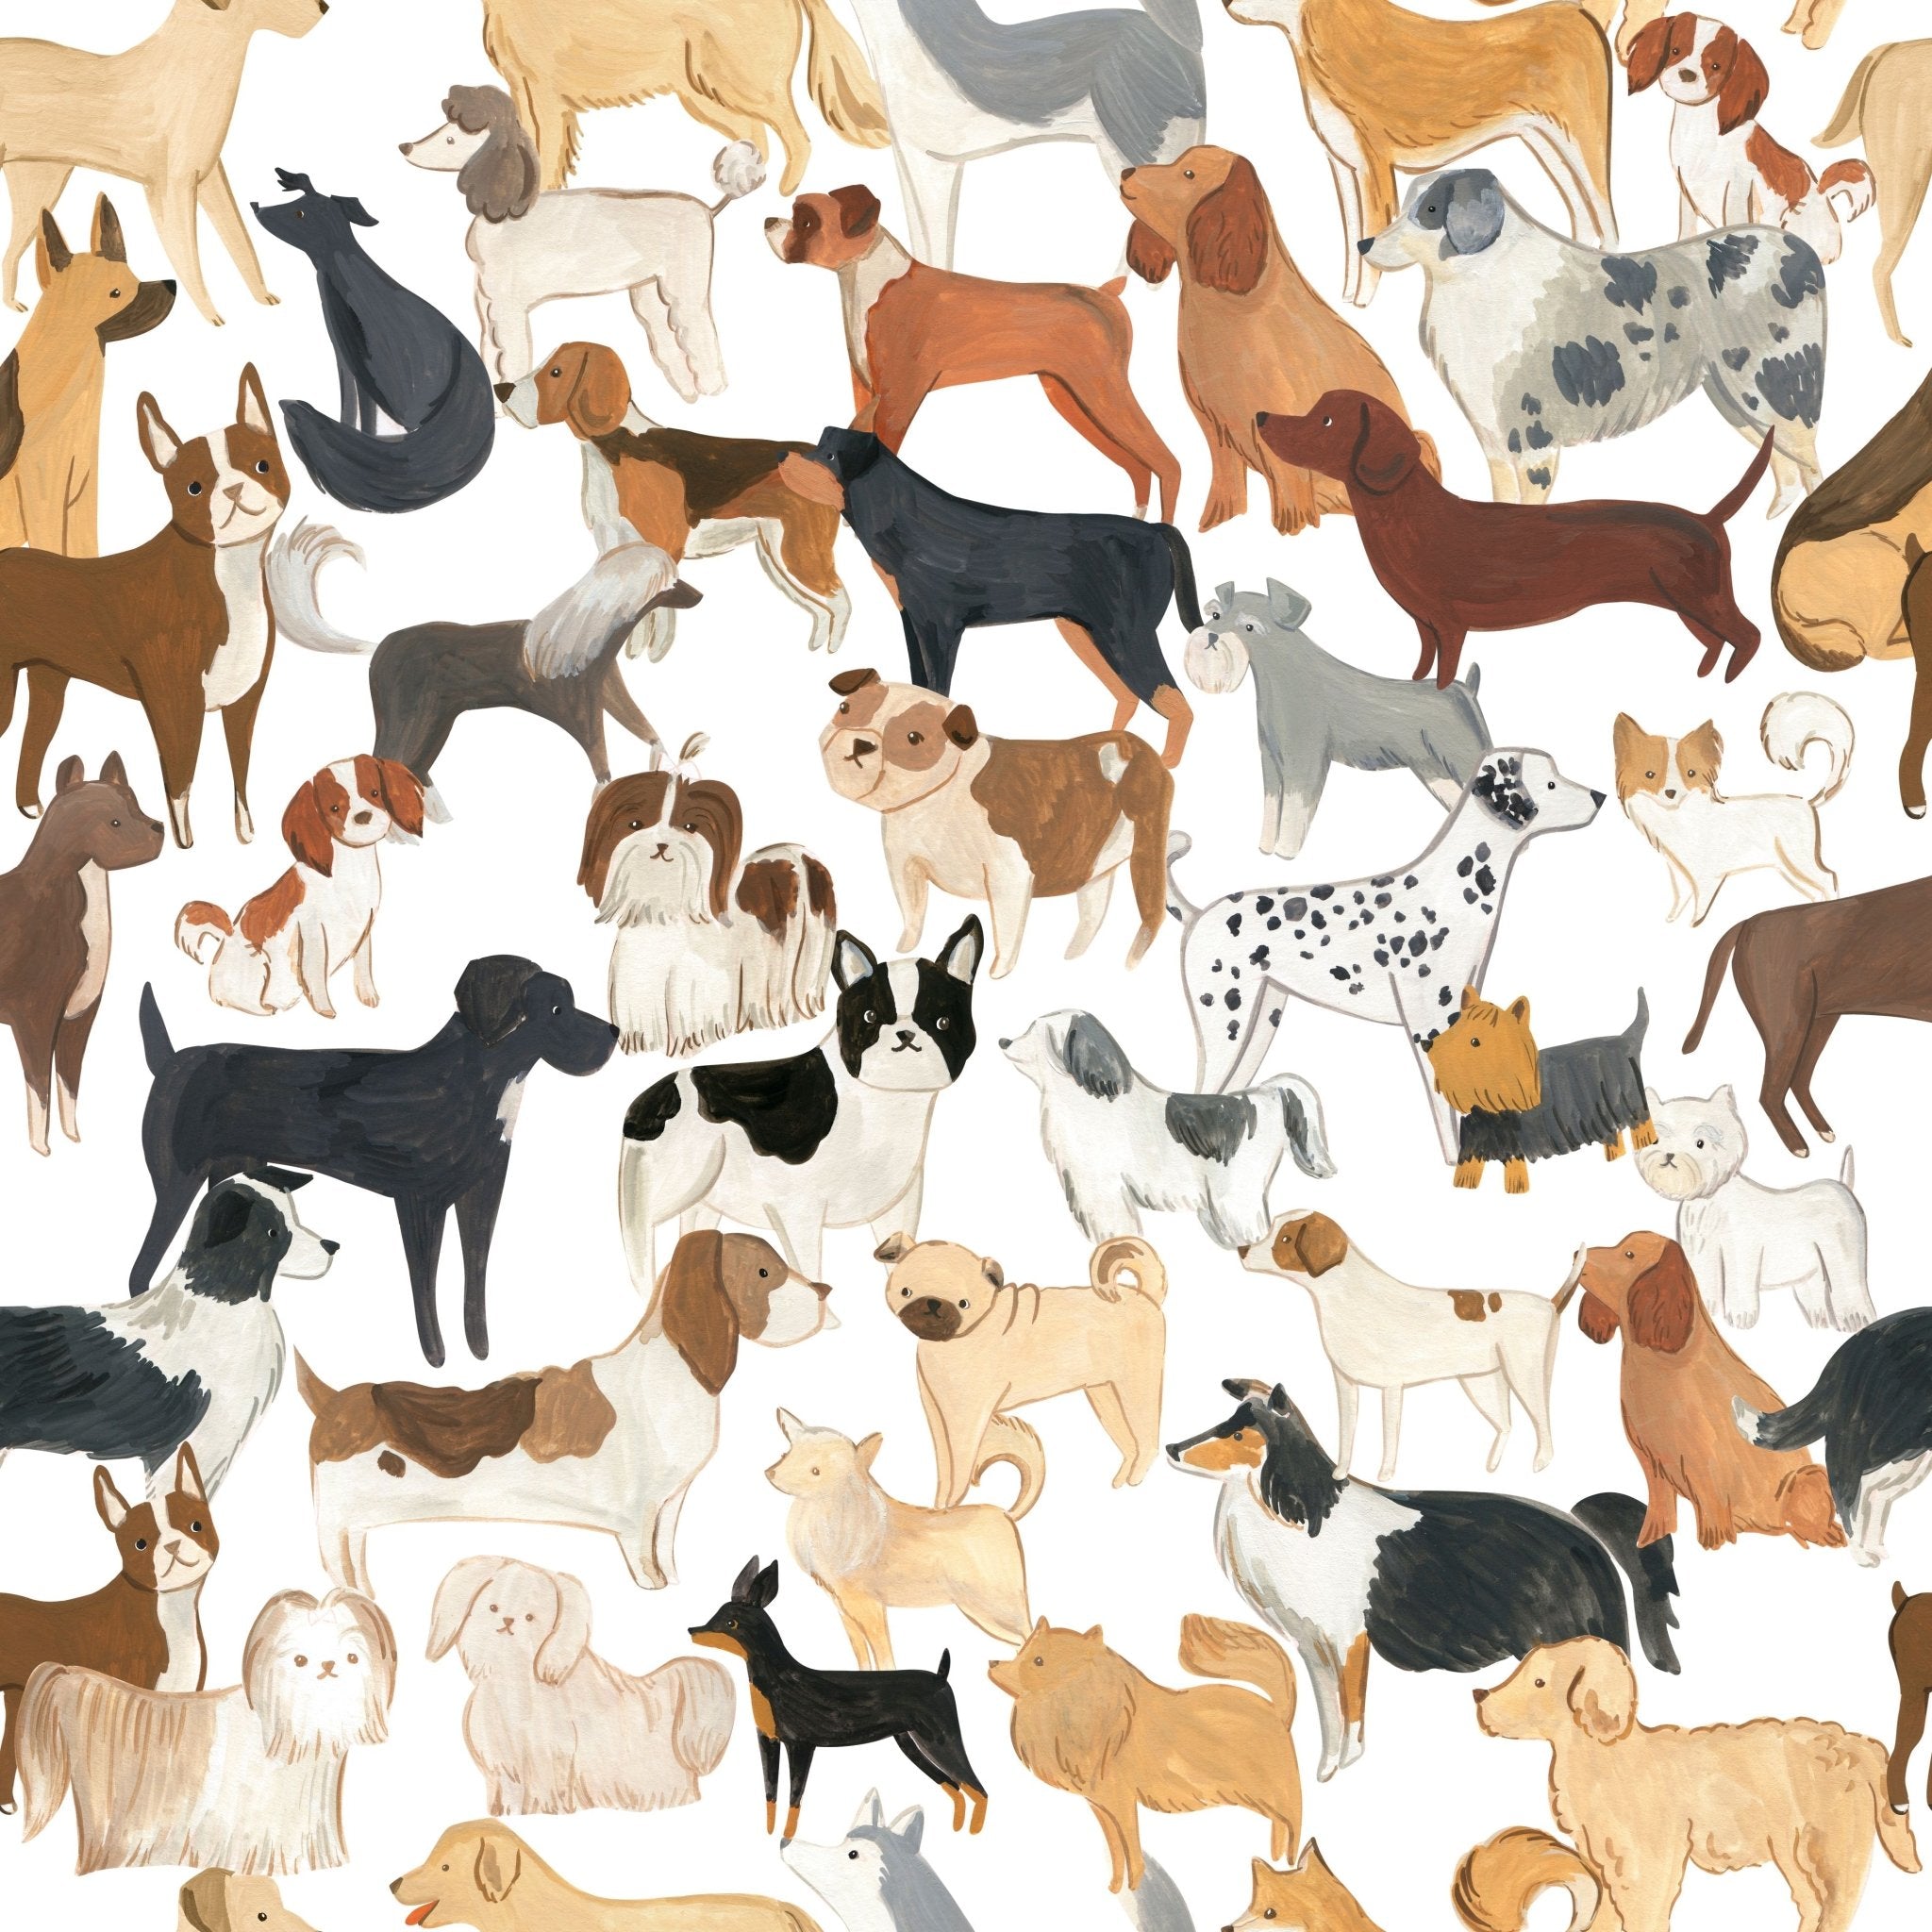 A close-up of wallpaper adorned with whimsical illustrations of different dog breeds in various colors and poses, giving a playful and eclectic feel.